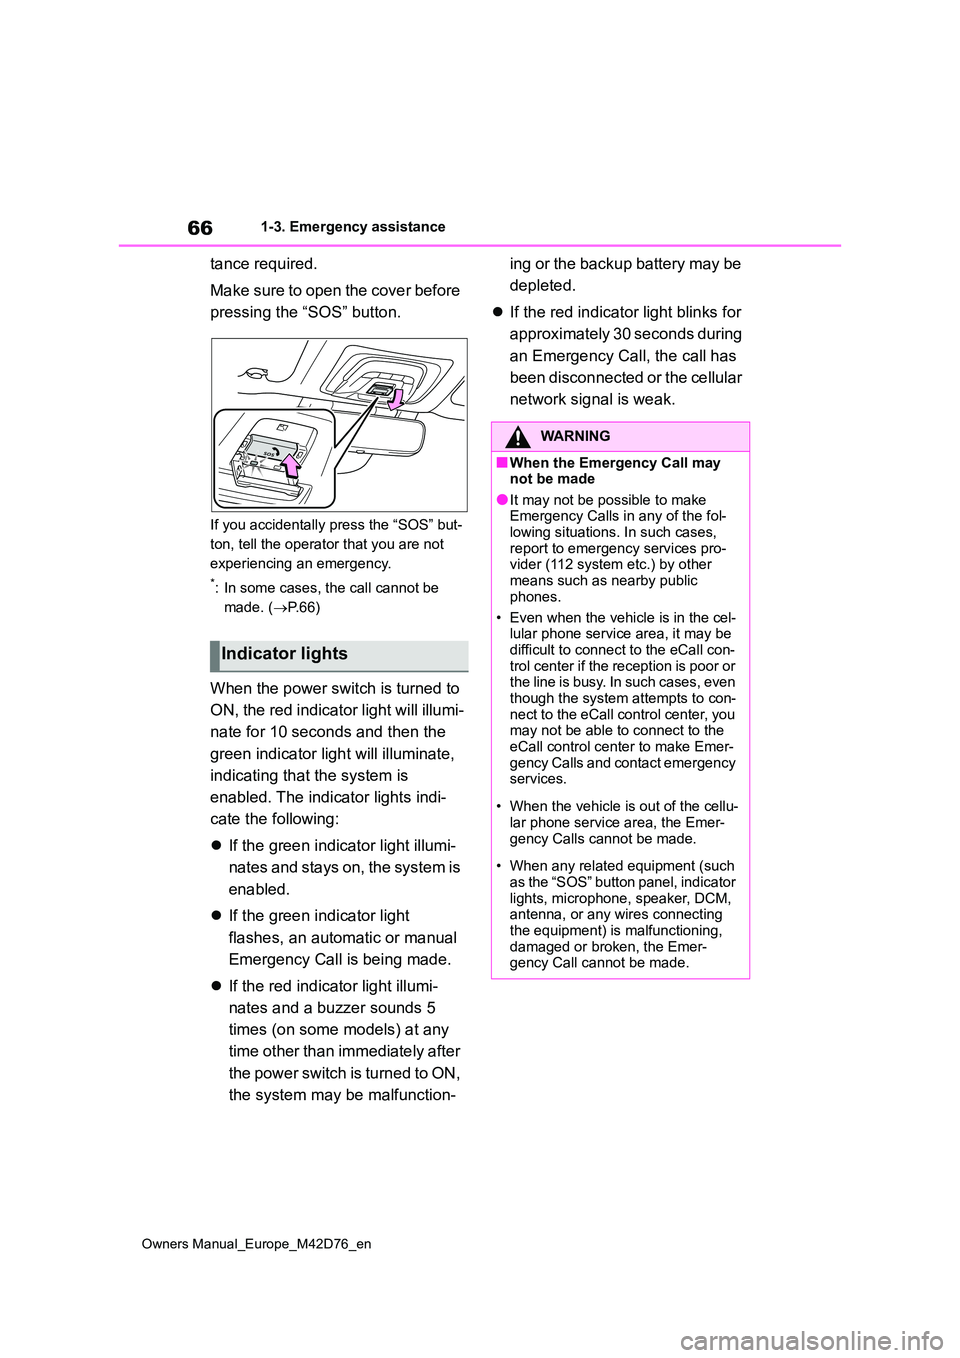 TOYOTA BZ4X 2022  Owners Manual (in English) 66
Owners Manual_Europe_M42D76_en
1-3. Emergency assistance
tance required. 
Make sure to open the cover before  
pressing the “SOS” button.
If you accidentally press the “SOS” but- 
ton, tell